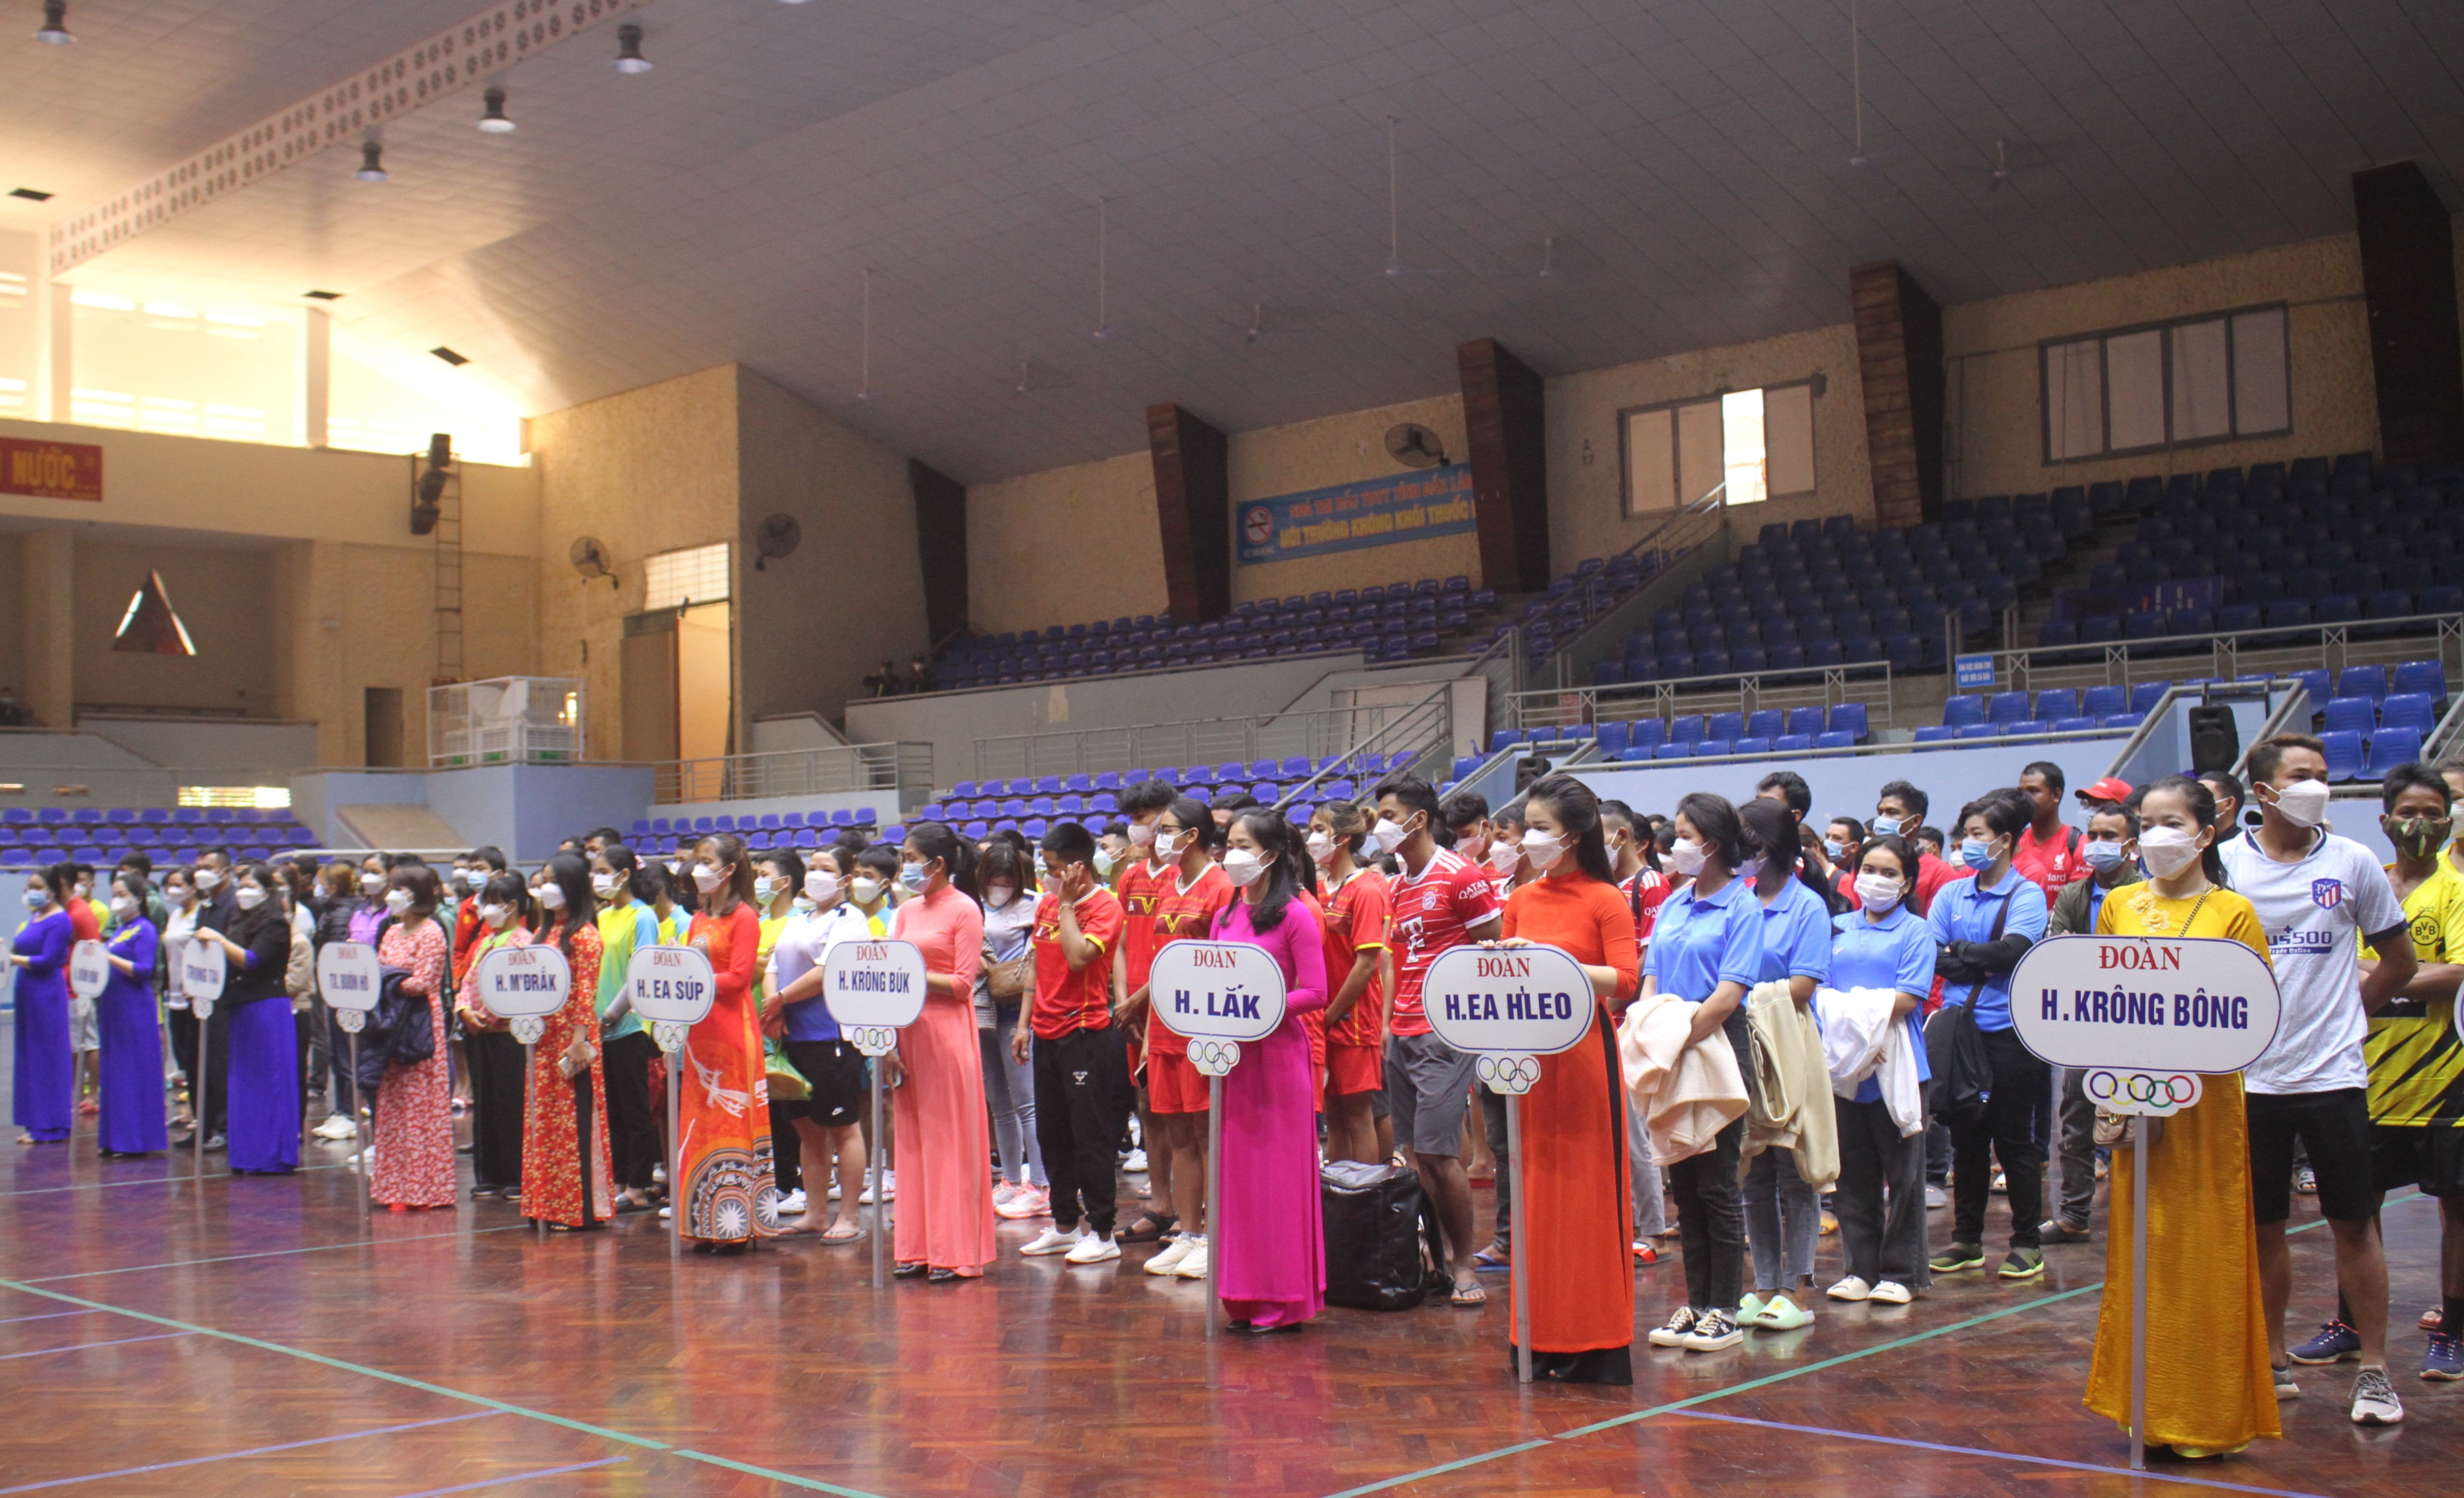 Opening ceremony of the 18th Dak Lak Province’s Sports Competition for Ethnic Minorities in 2022